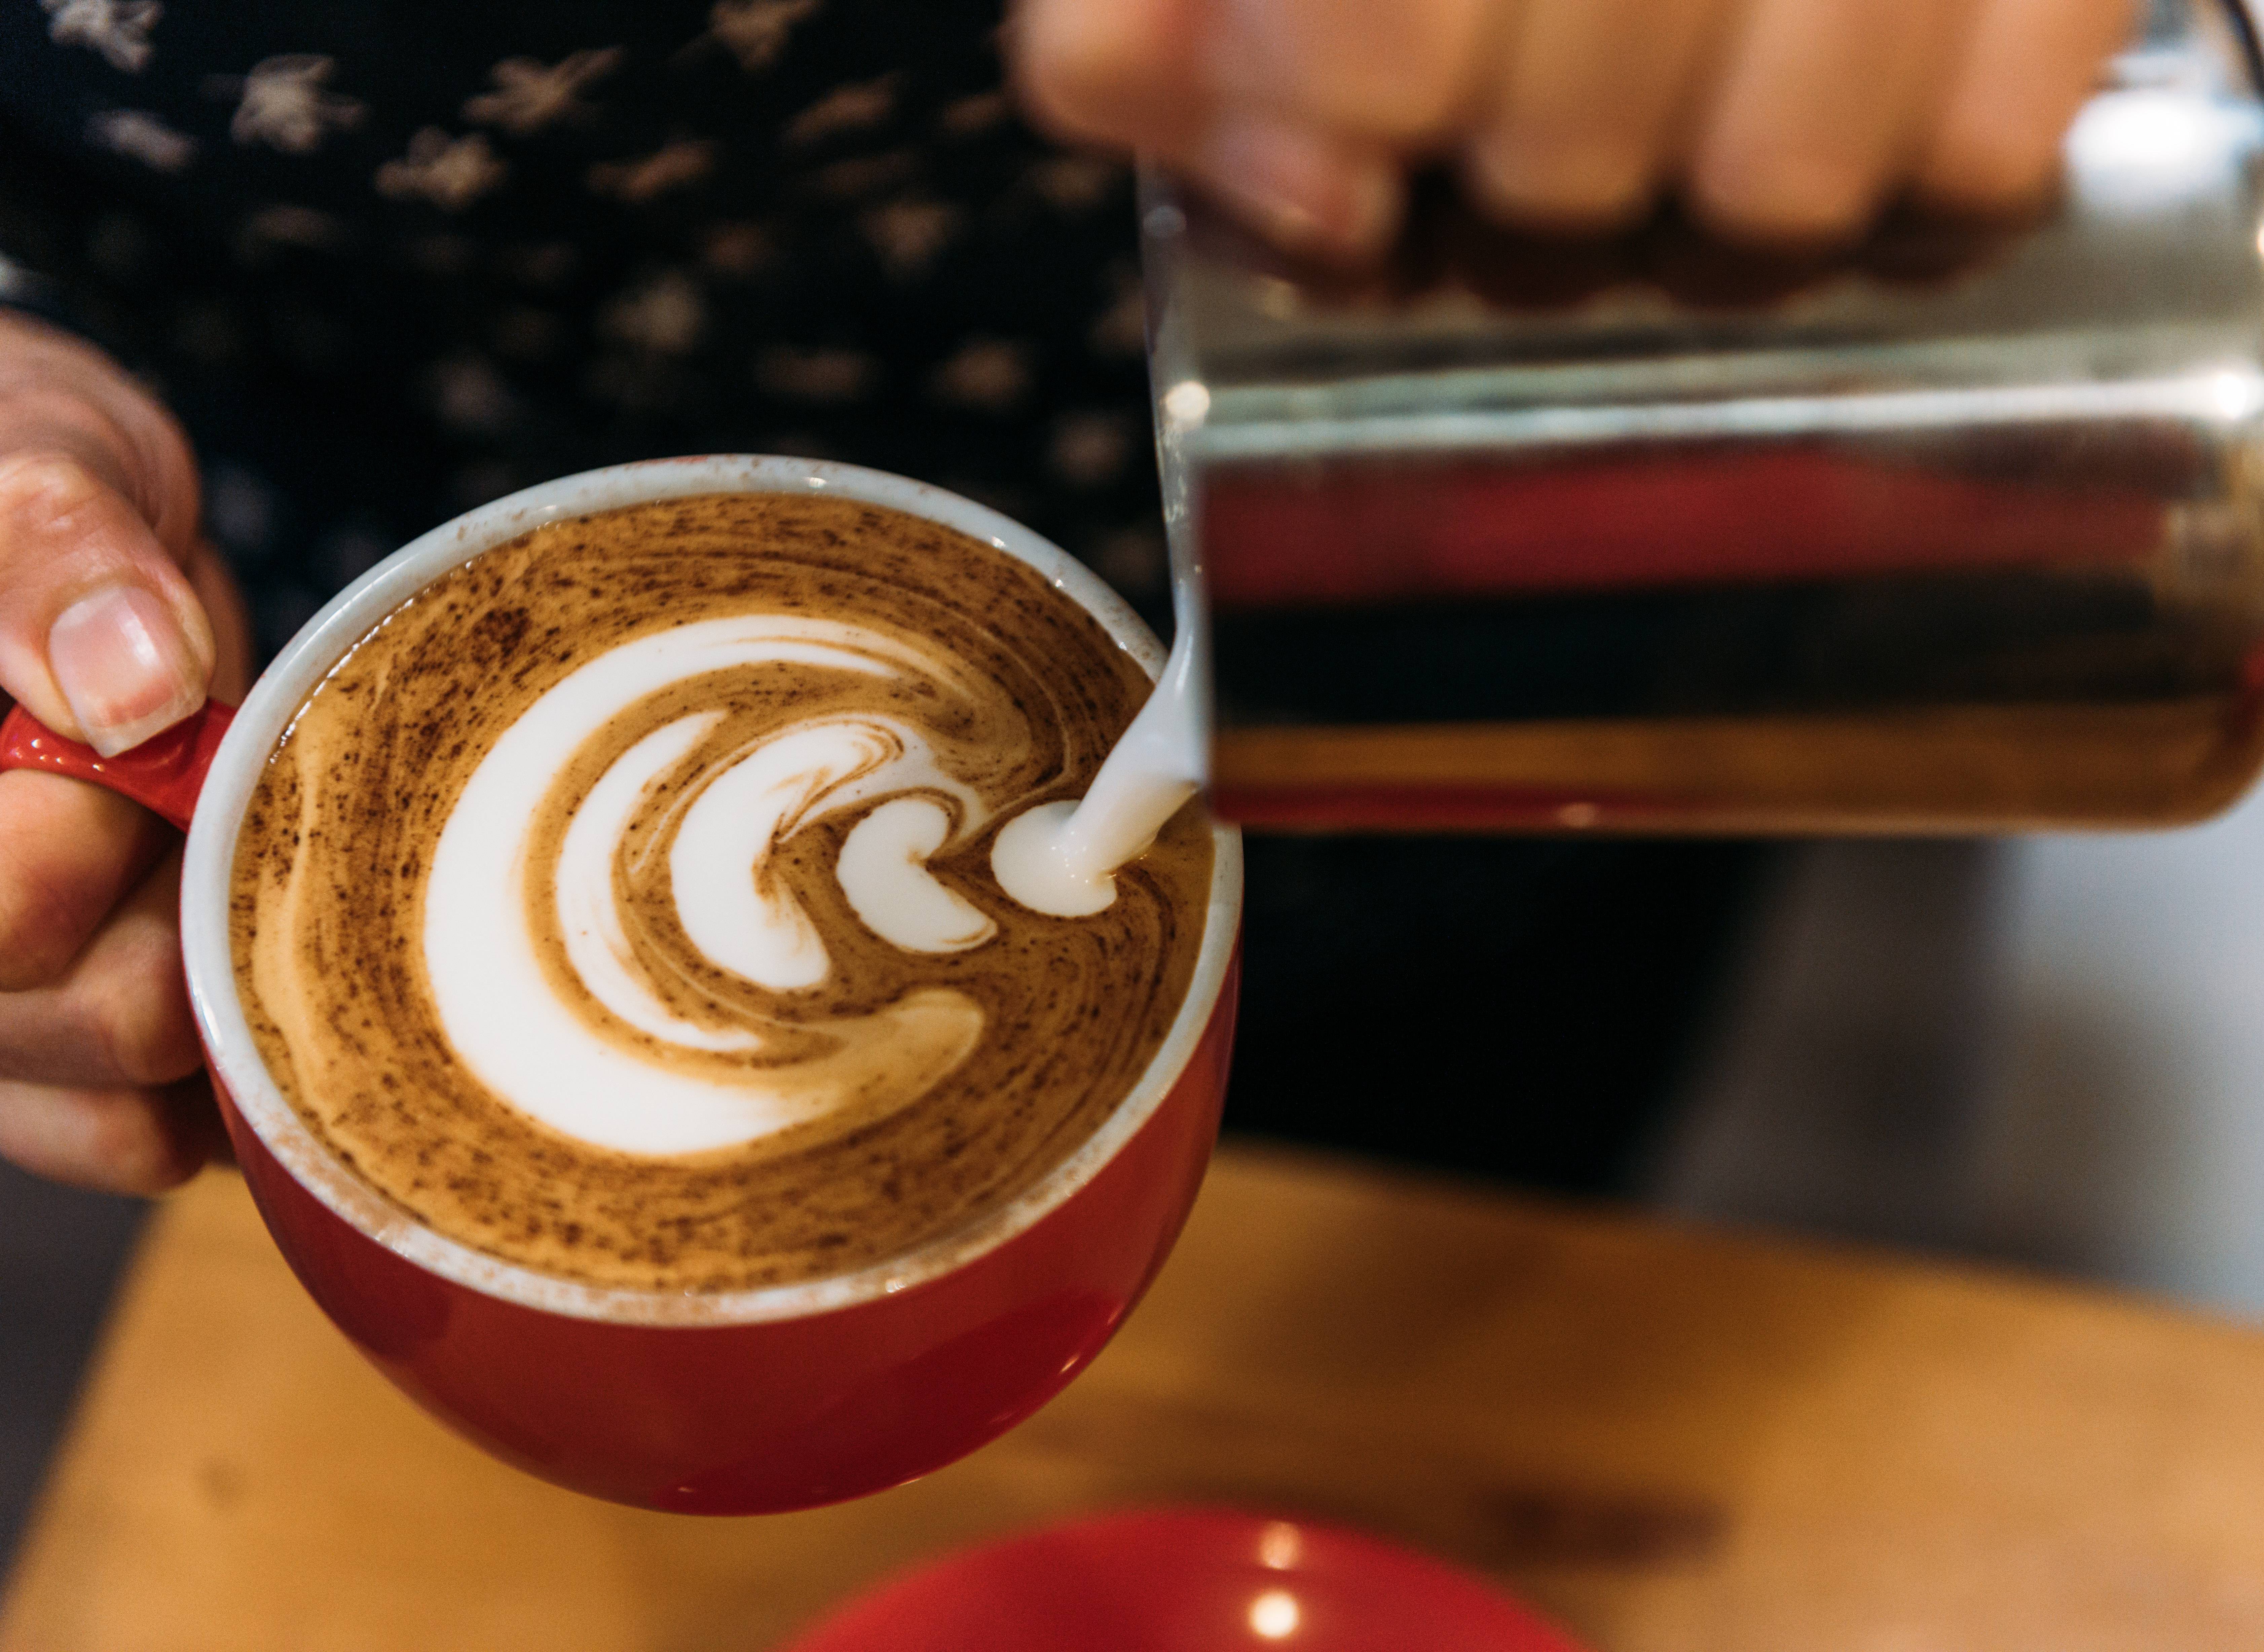 A cup displaying Latte art